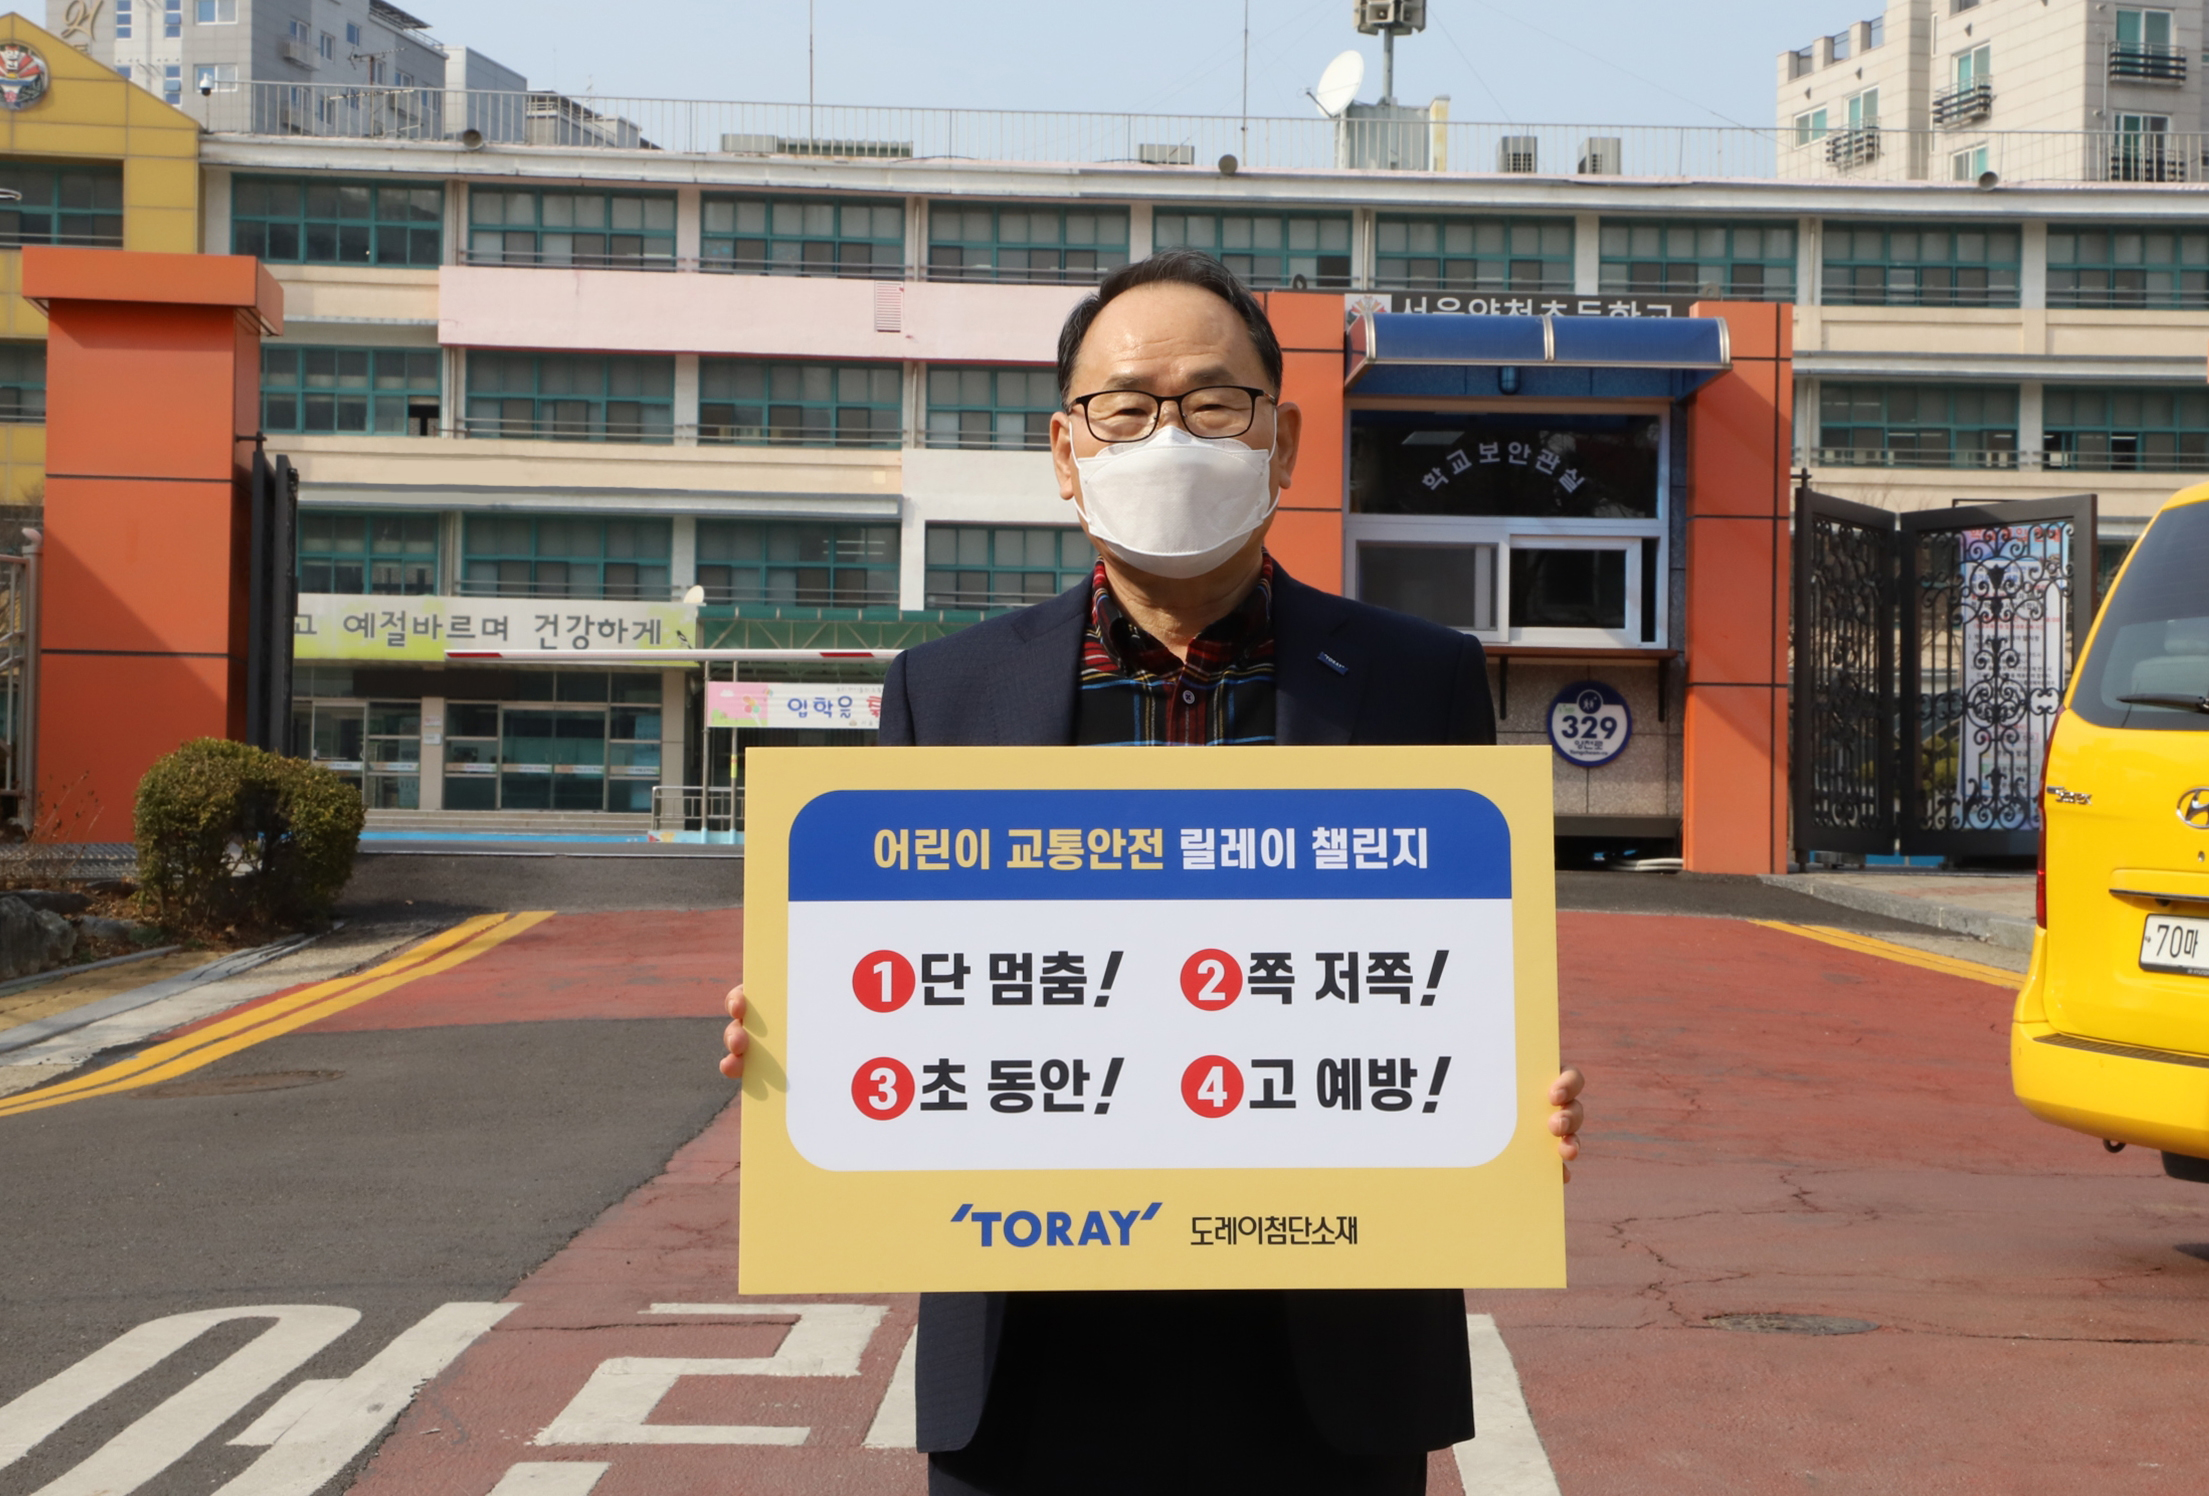 Chairman Lee Young-kwan participates in the Children's Traffic Safety Relay Challenge